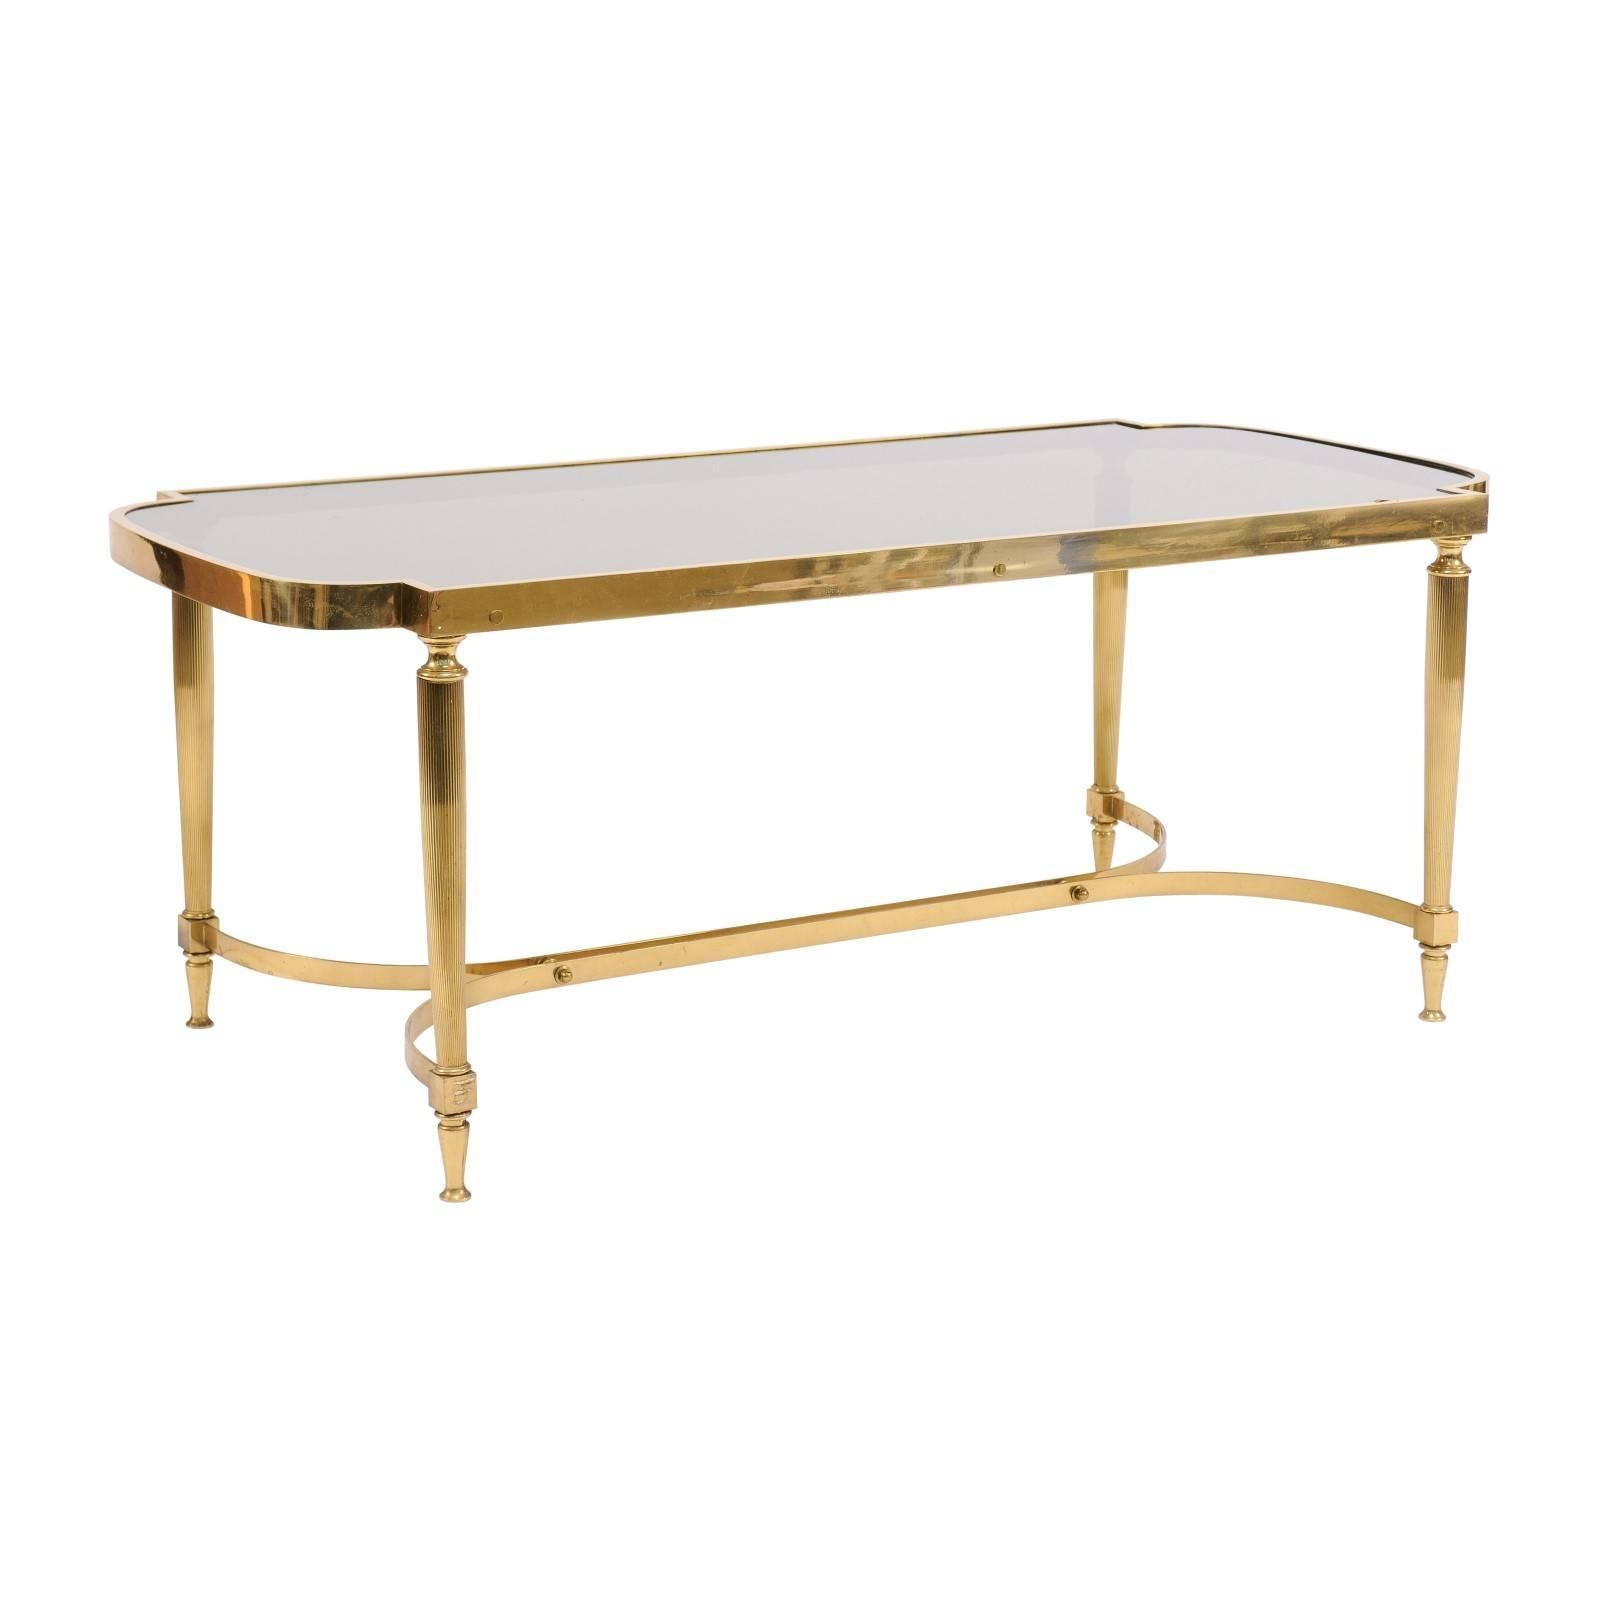 French Midcentury Modern Bronze Coffee Table with Smoked Glass and Reeded Legs